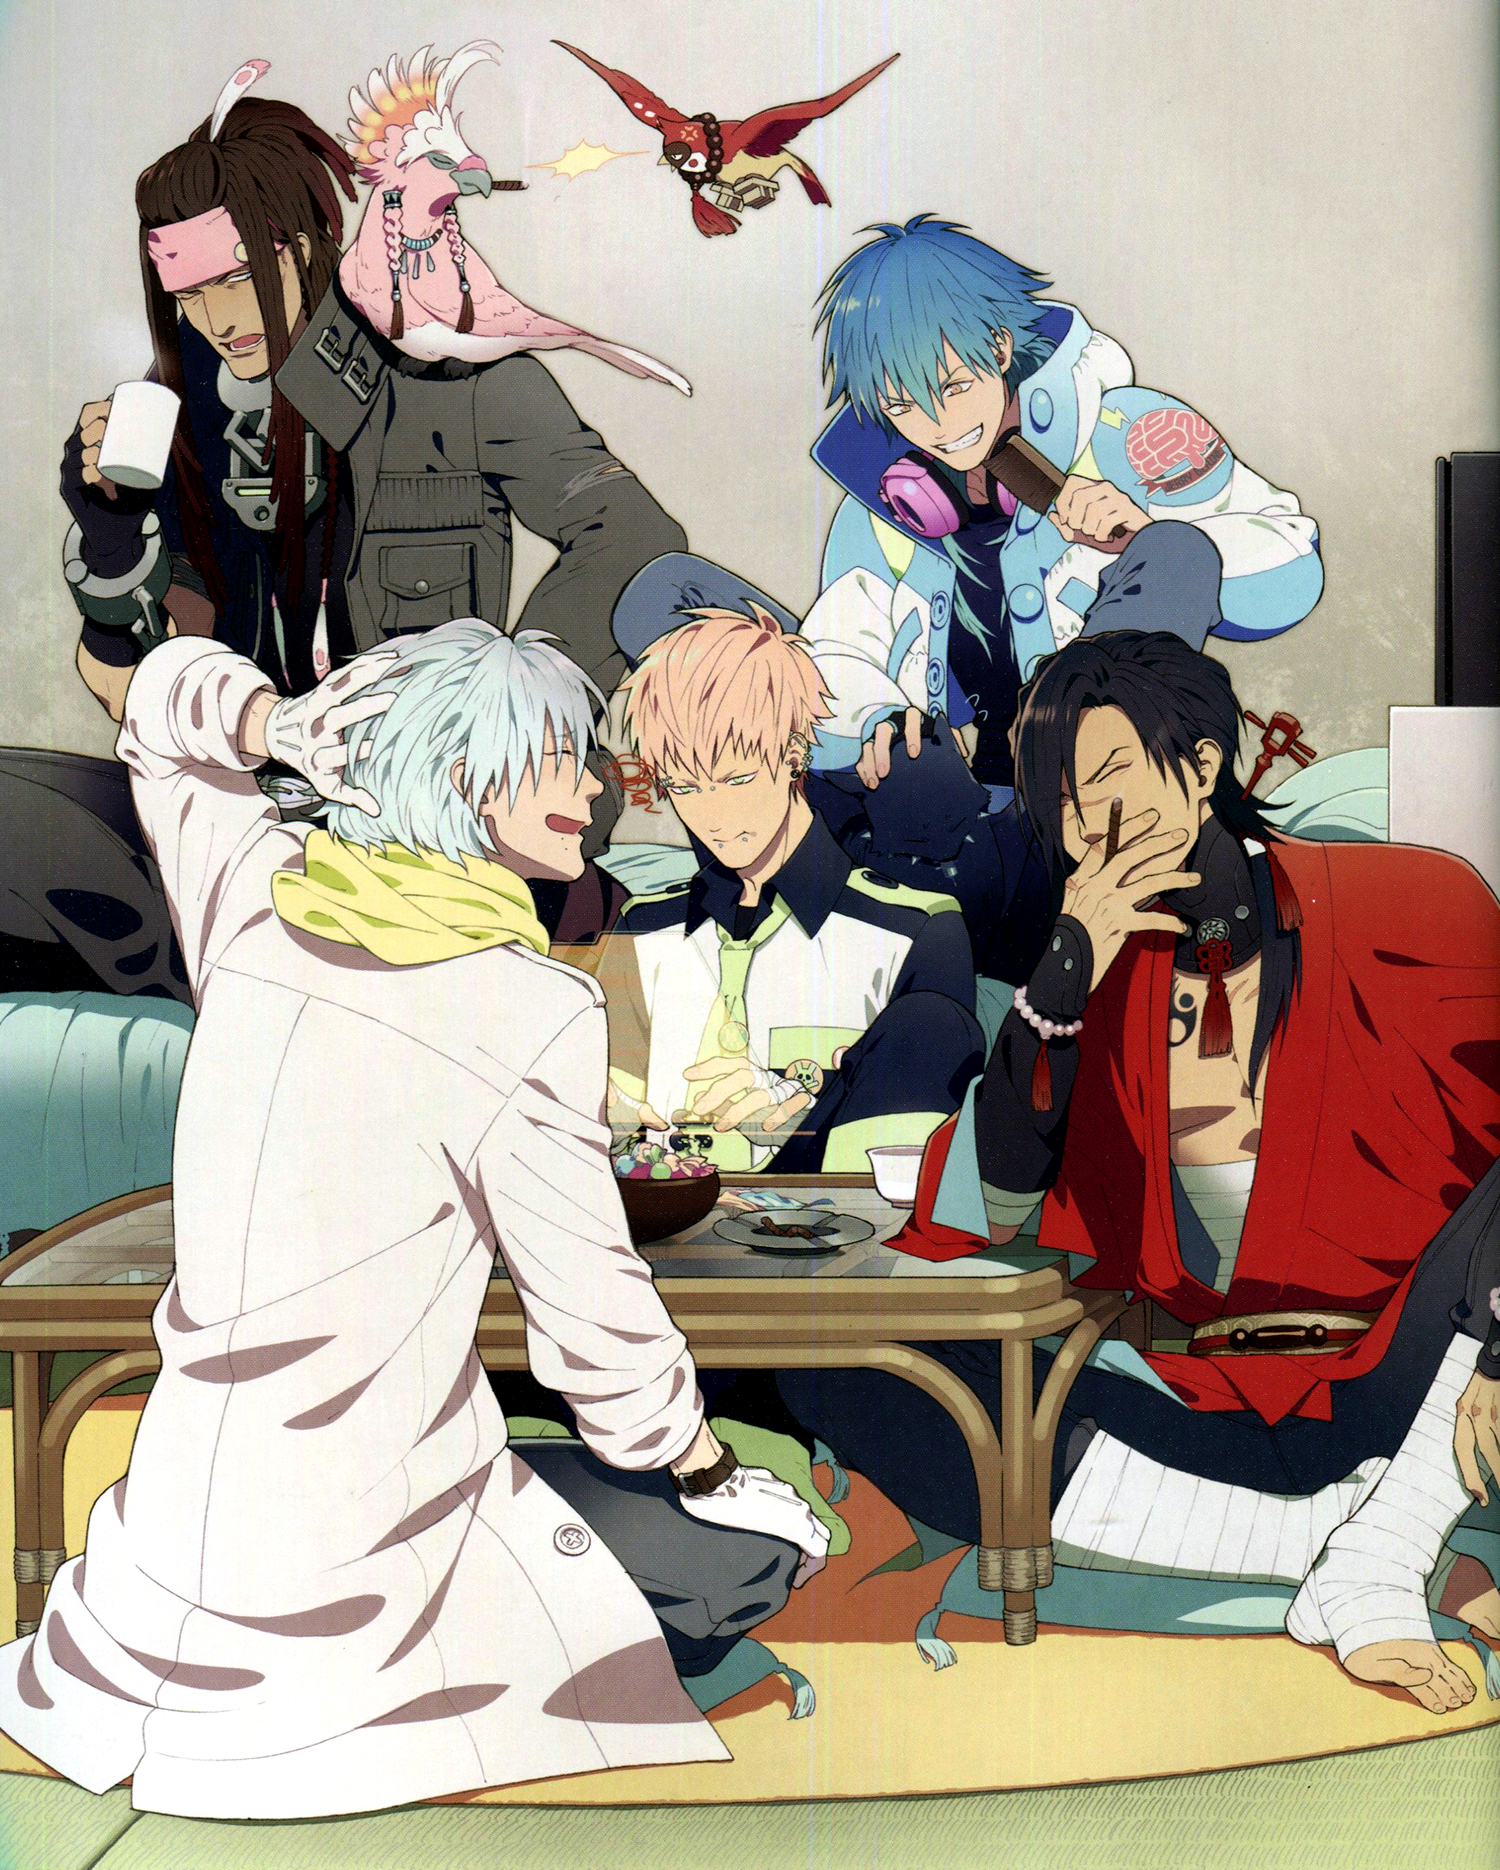 How to download dramatical murder